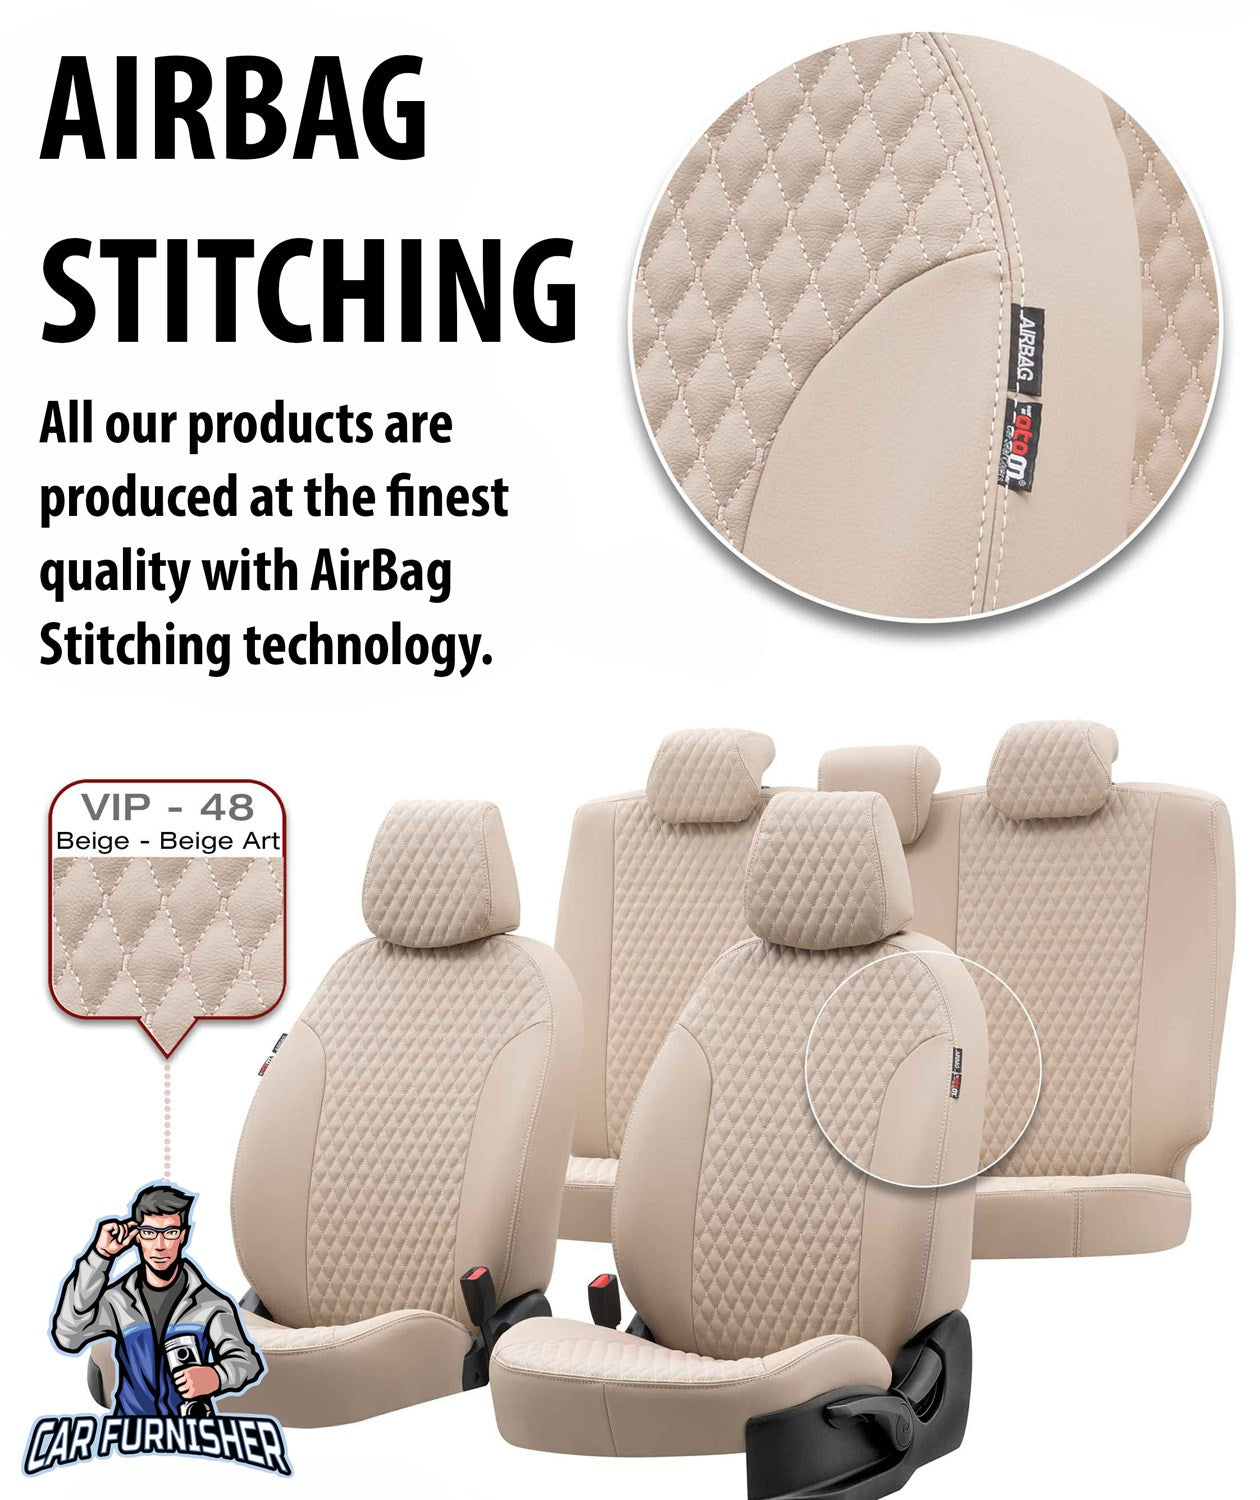 Bmw 2 Series Seat Cover Amsterdam Leather Design Beige Leather